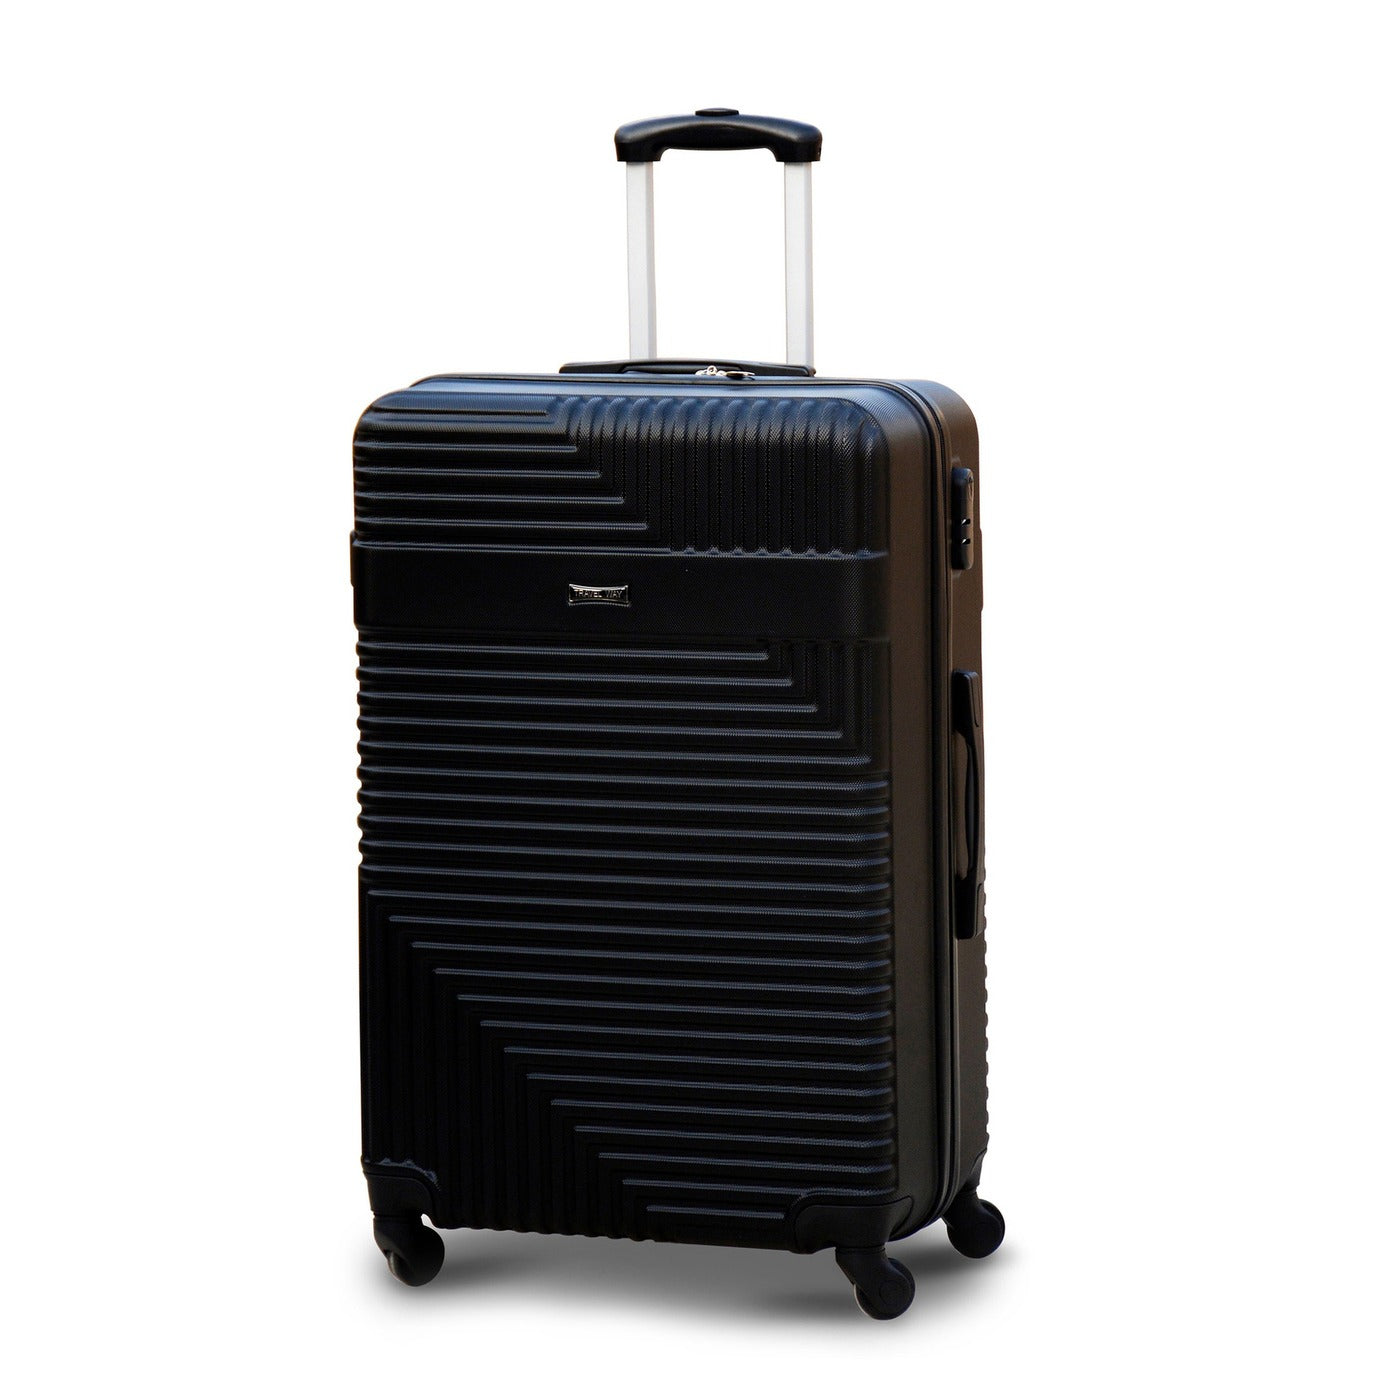 32" Black Colour Travel Way ABS Luggage Lightweight Hard Case Trolley Bag with Spinner Wheel